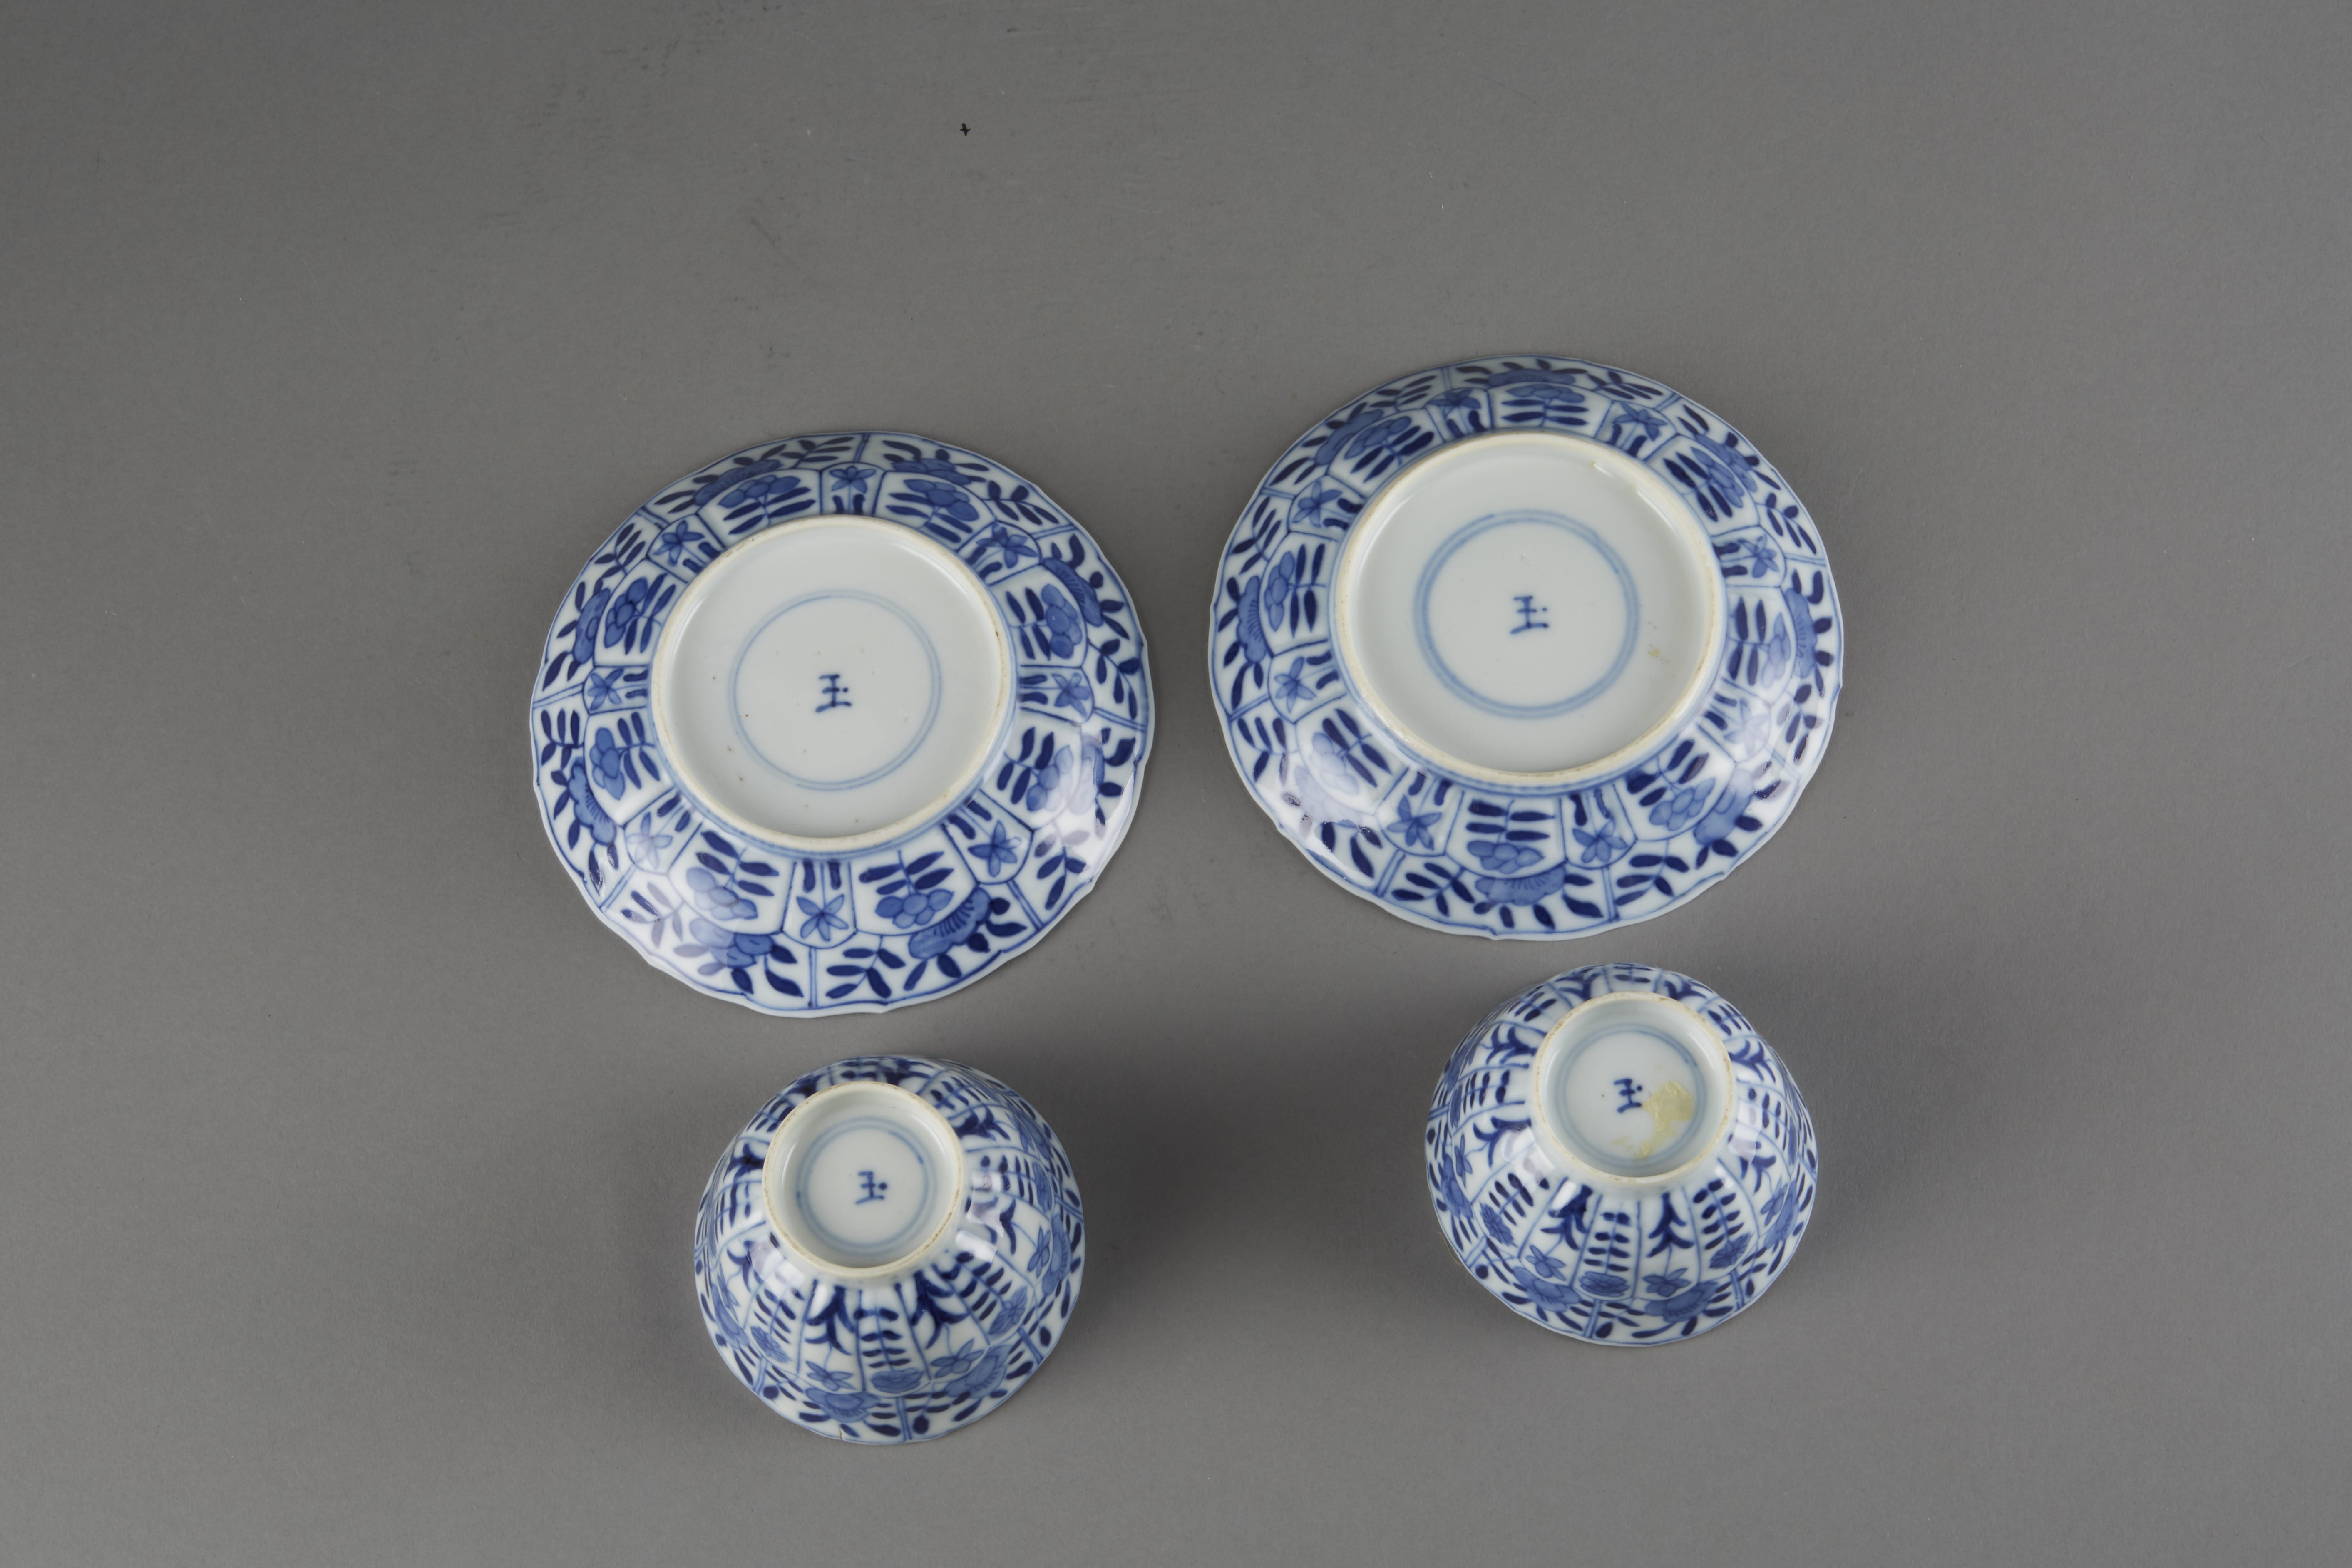 Lot 084: Chinese 18th Century Kangxi Blue and White Export Porcelain Pair of Cups and Saucers